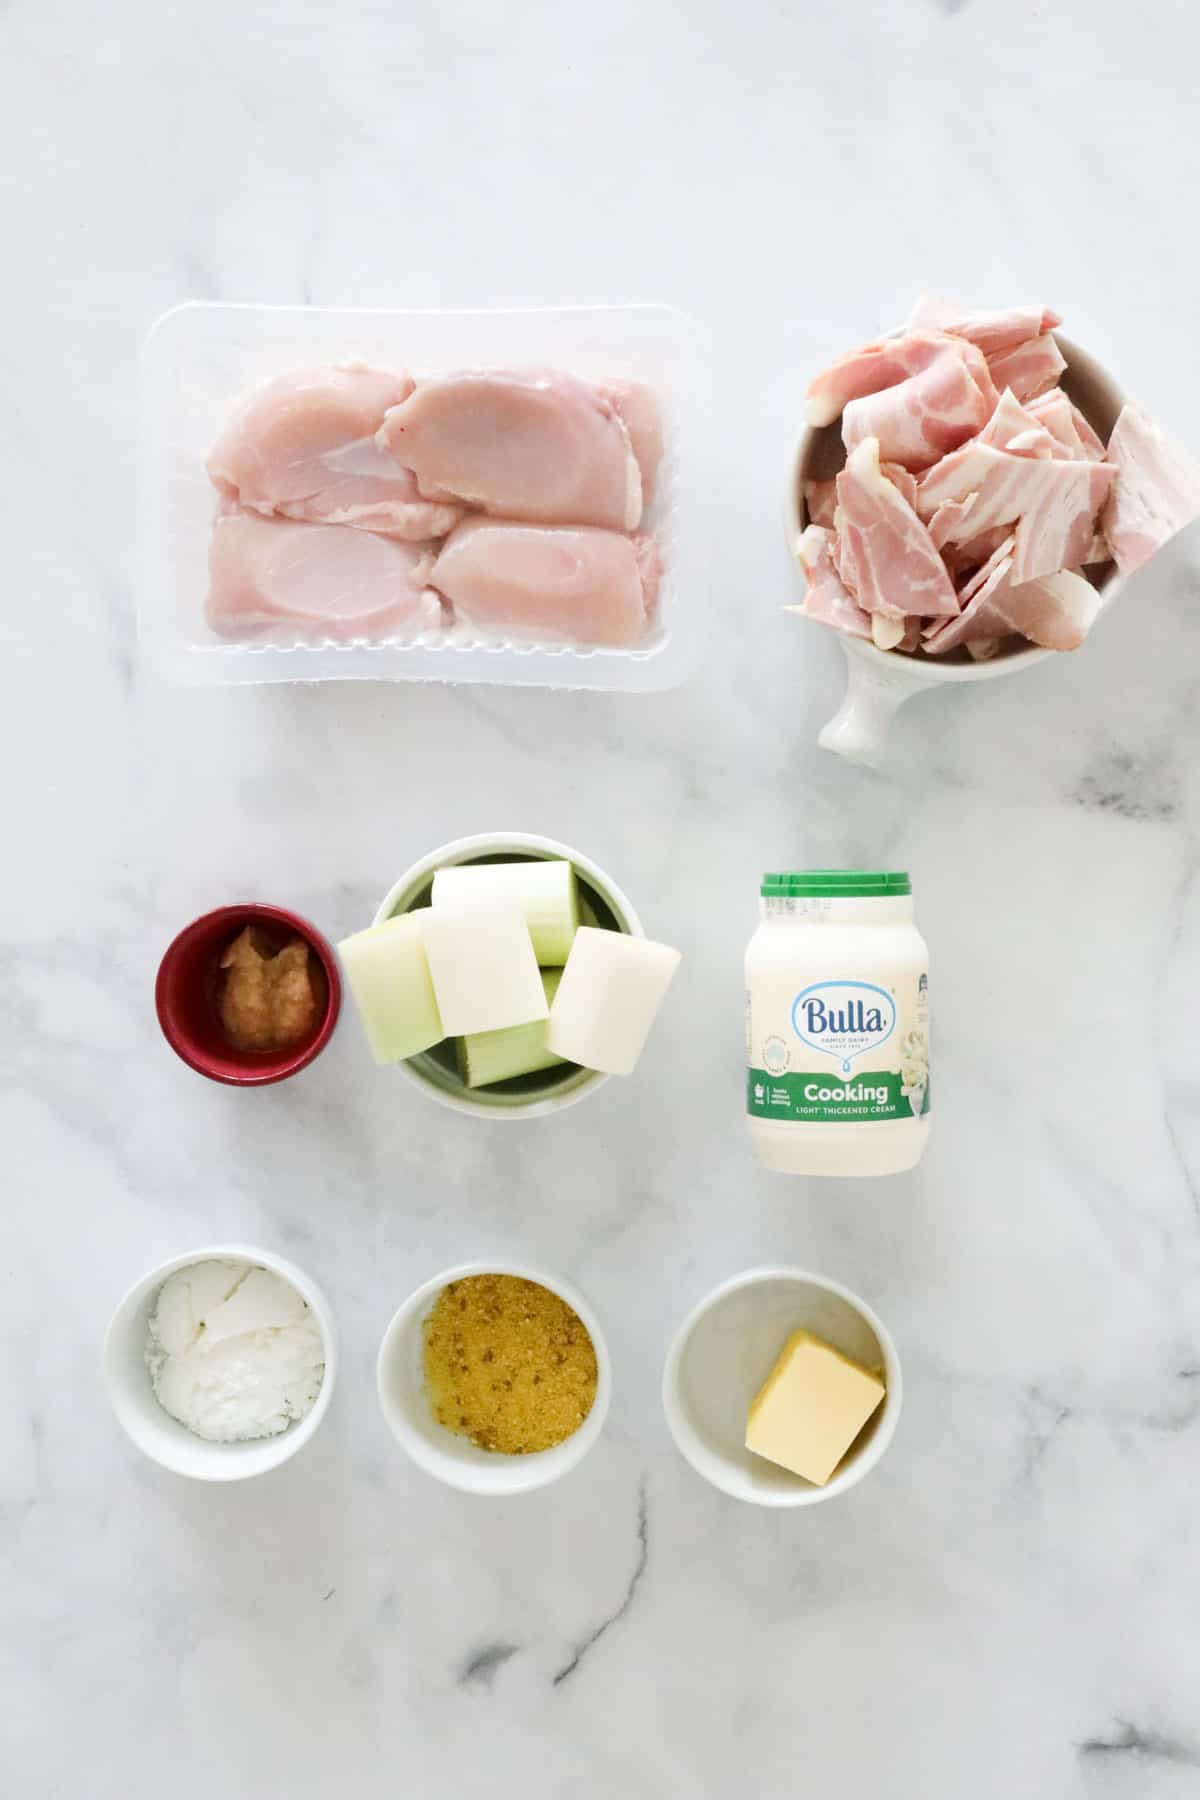 The ingredients for Thermomix Creamy Chicken Pies.